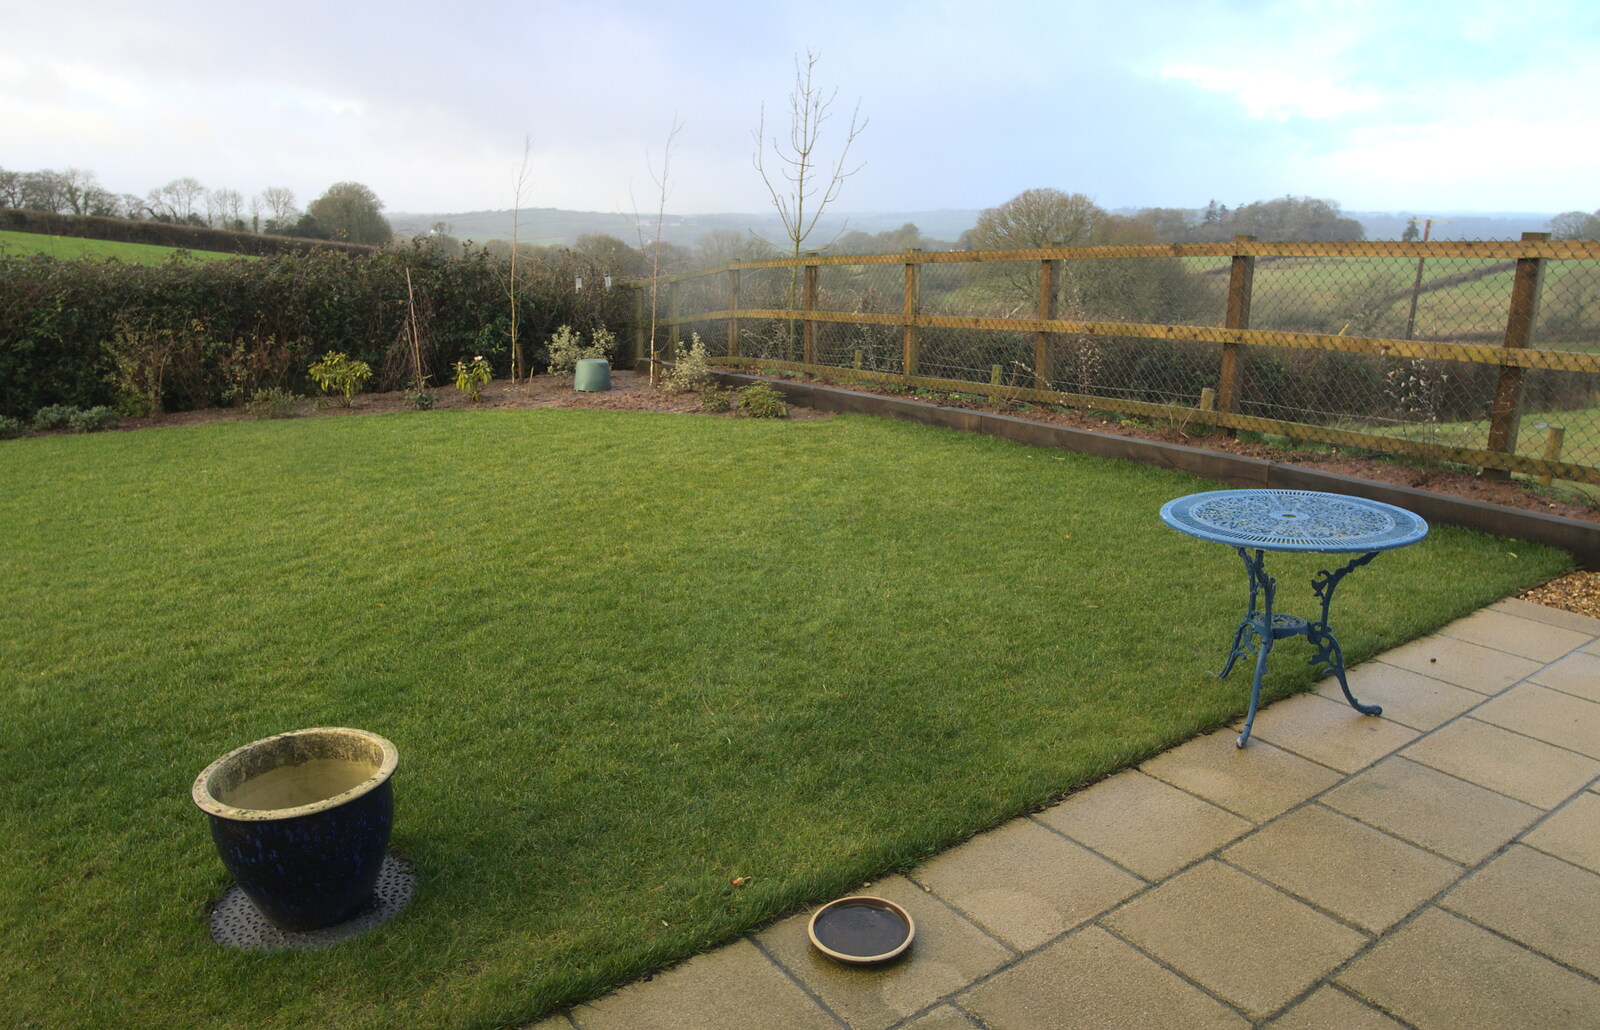 Mother's new garden from The Boxing Day Hunt, Chagford, Devon - 26th December 2012